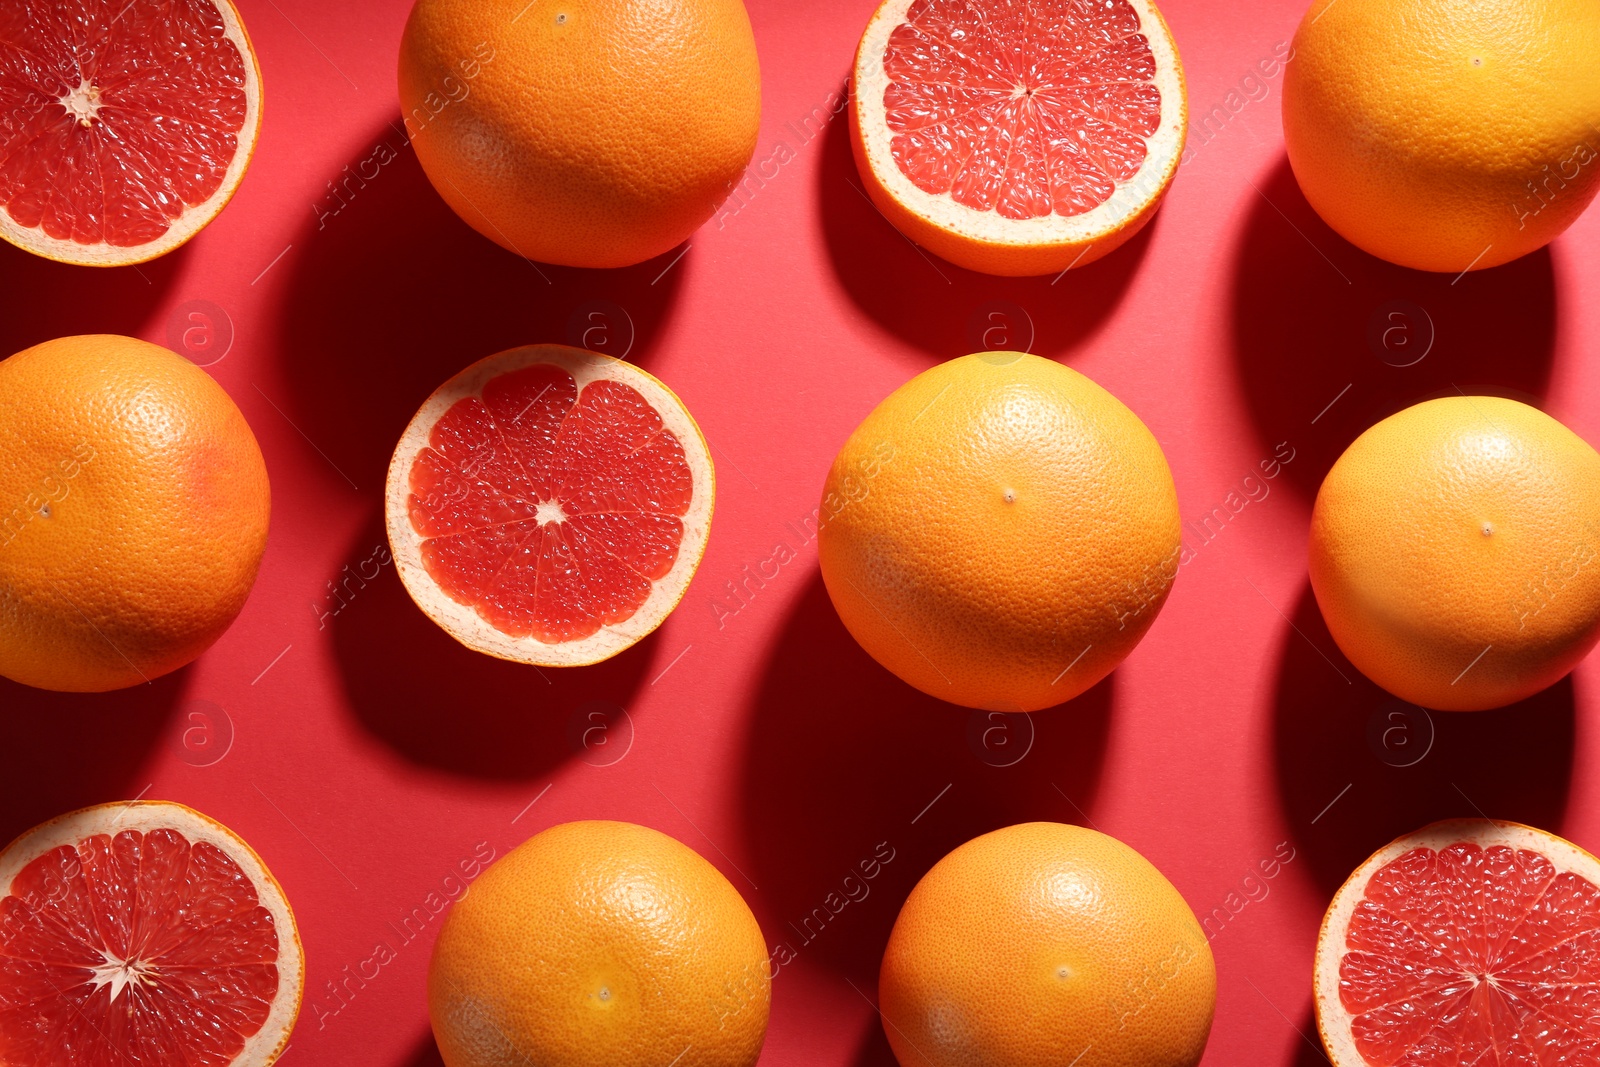 Photo of Cut and whole ripe grapefruits on red background, flat lay